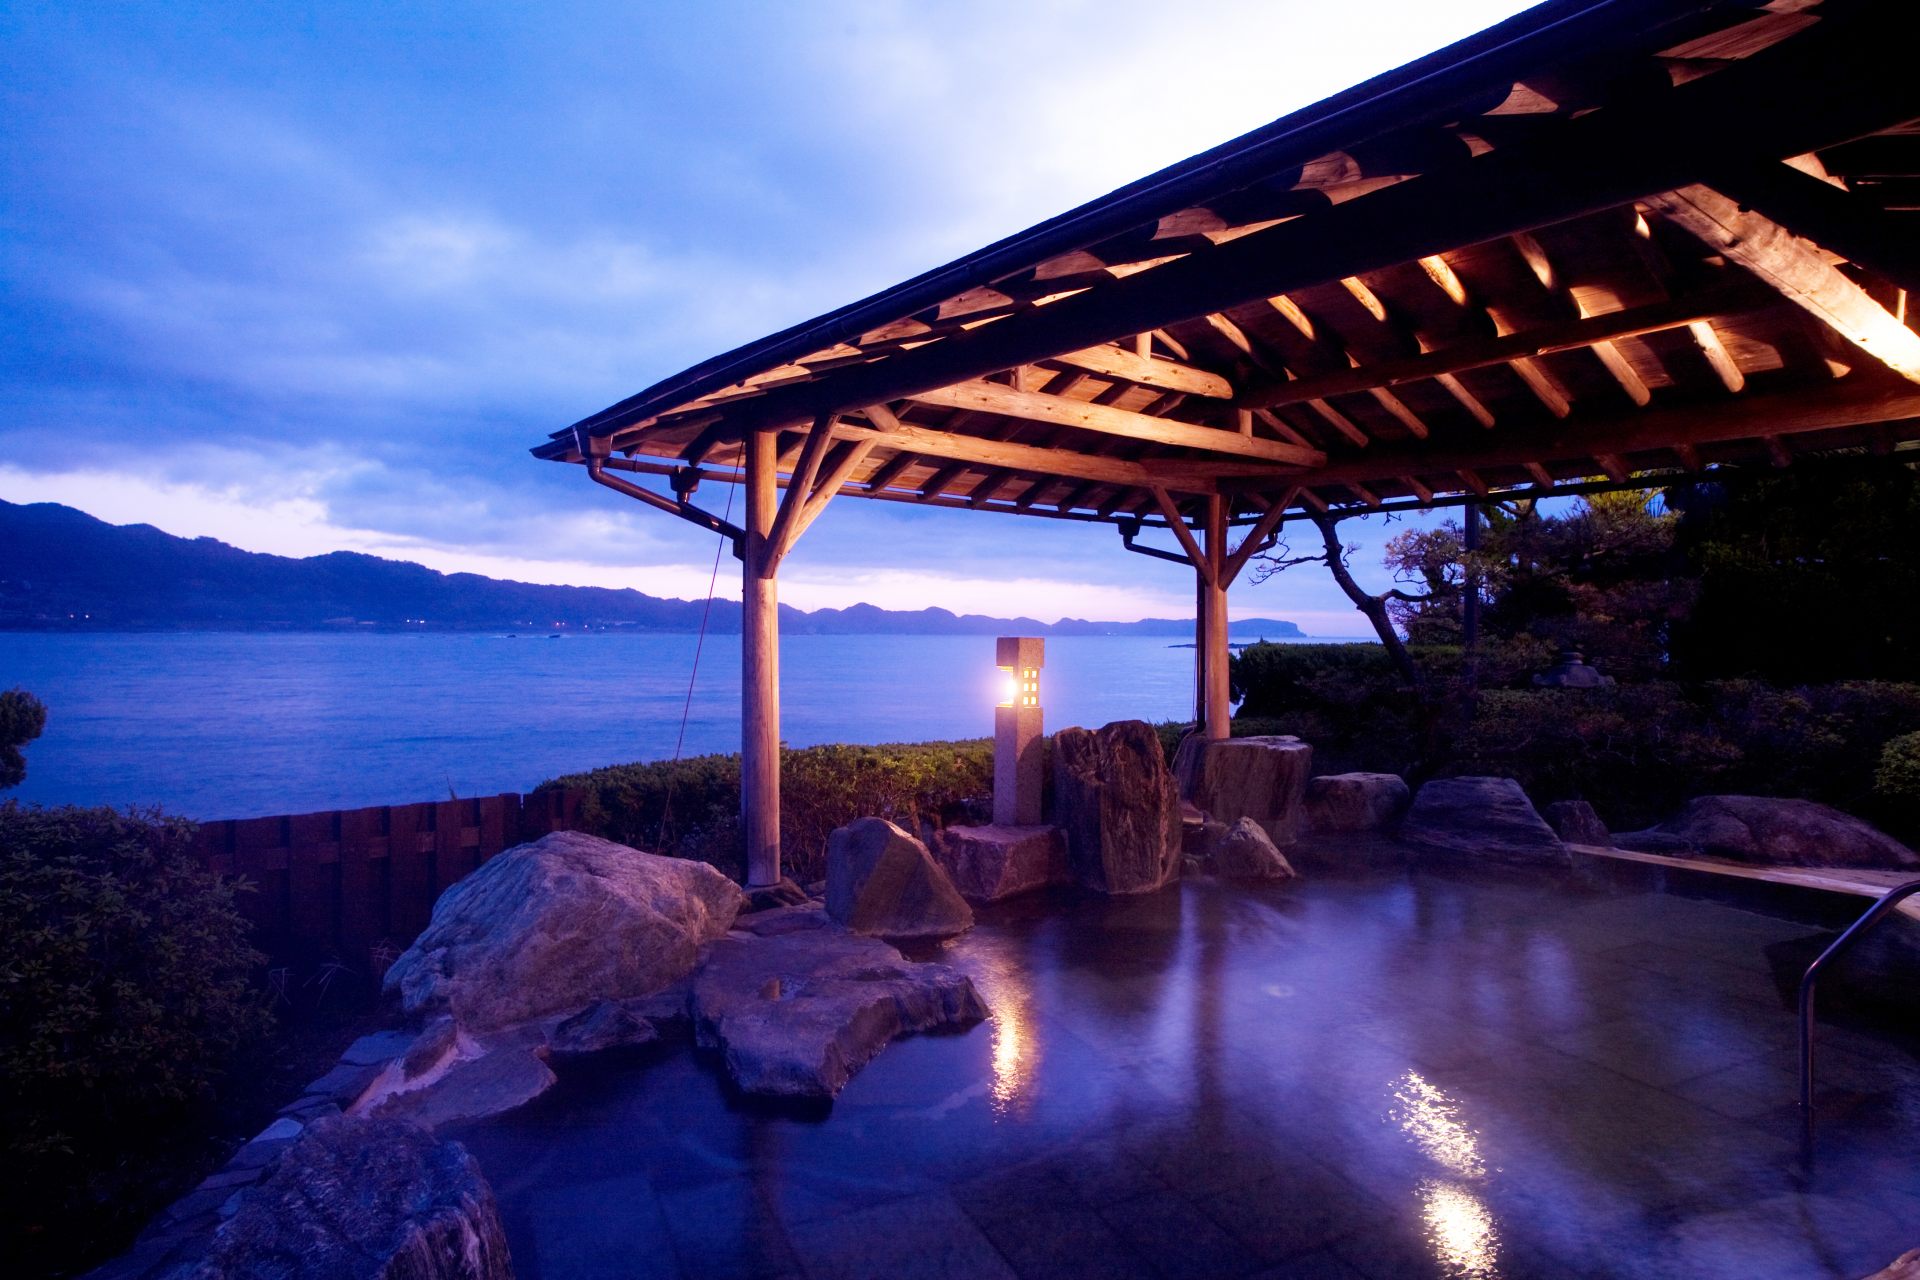 Complete with open-air baths that overlook the ocean, the Katsuura Gyoen hot spring inn offers day-use baths.

